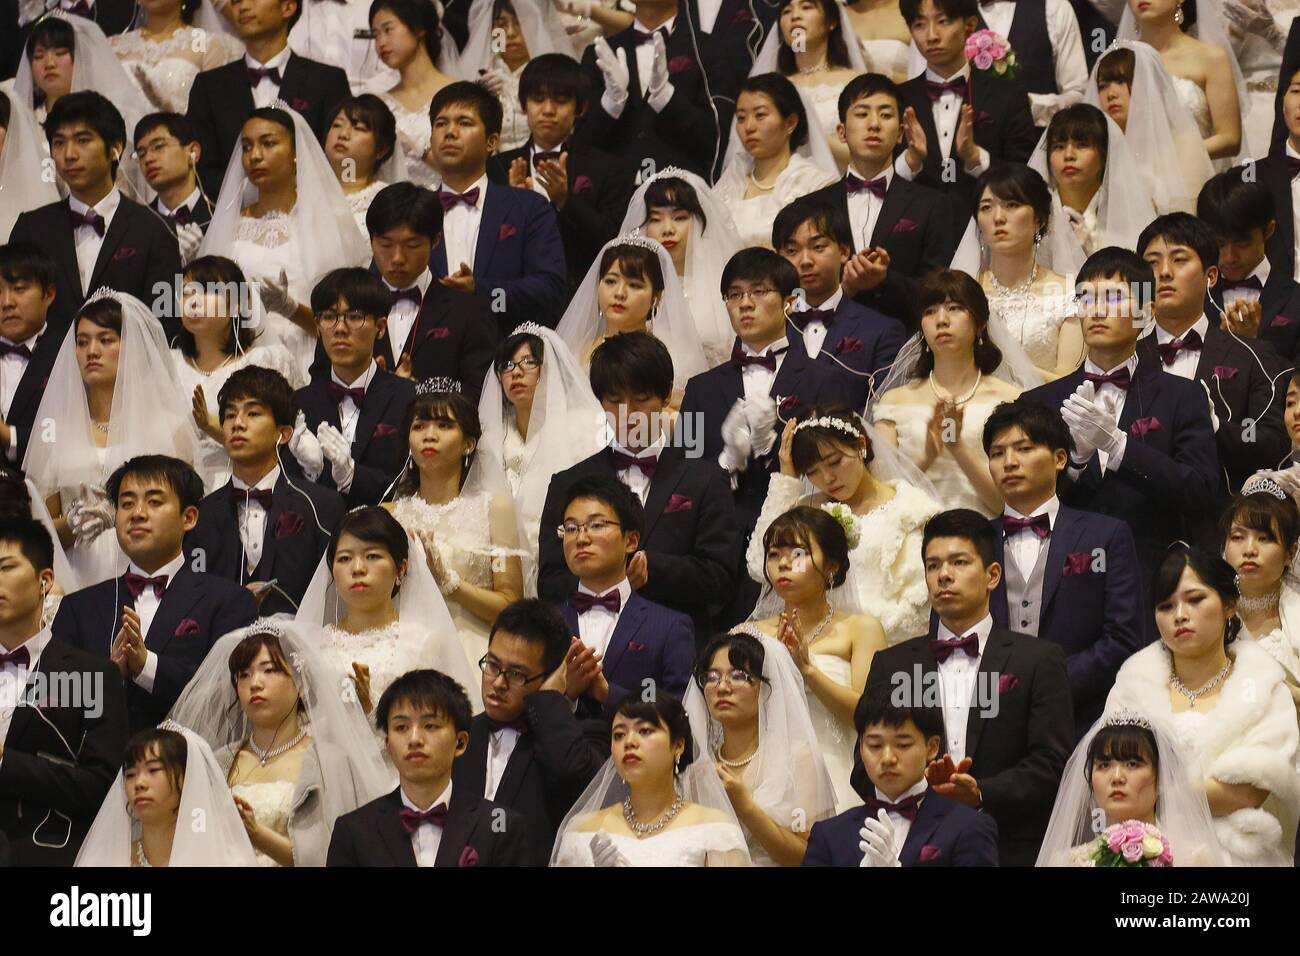 Gapyeong, South Korea. 7th Feb, 2020. Thousands of couples take part in a mass wedding of the Family Federation for World Peace and Unification, commonly known as the Unification Church, at Cheongshim Peace World Center in Gapyeong-gun, South Korea. Credit: Ryu Seung-Il/ZUMA Wire/Alamy Live News Stock Photo